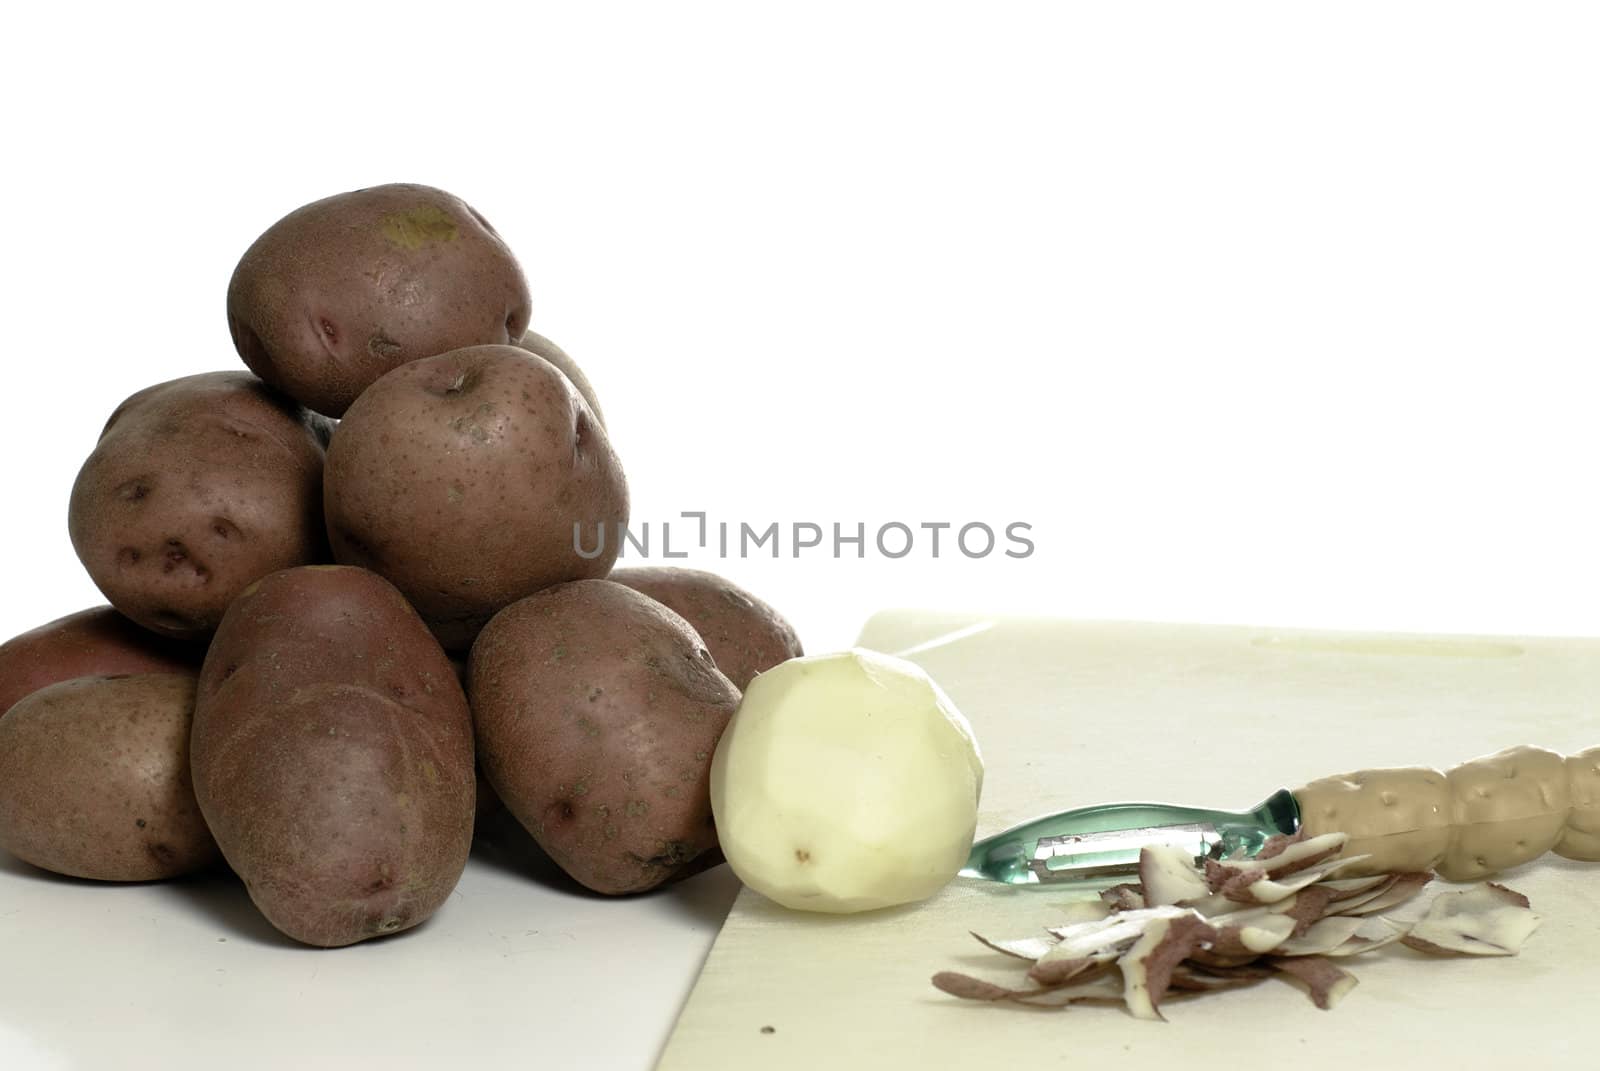 Peeled and unpeeled potatoes shot on a cutting board, isolated against a white background.